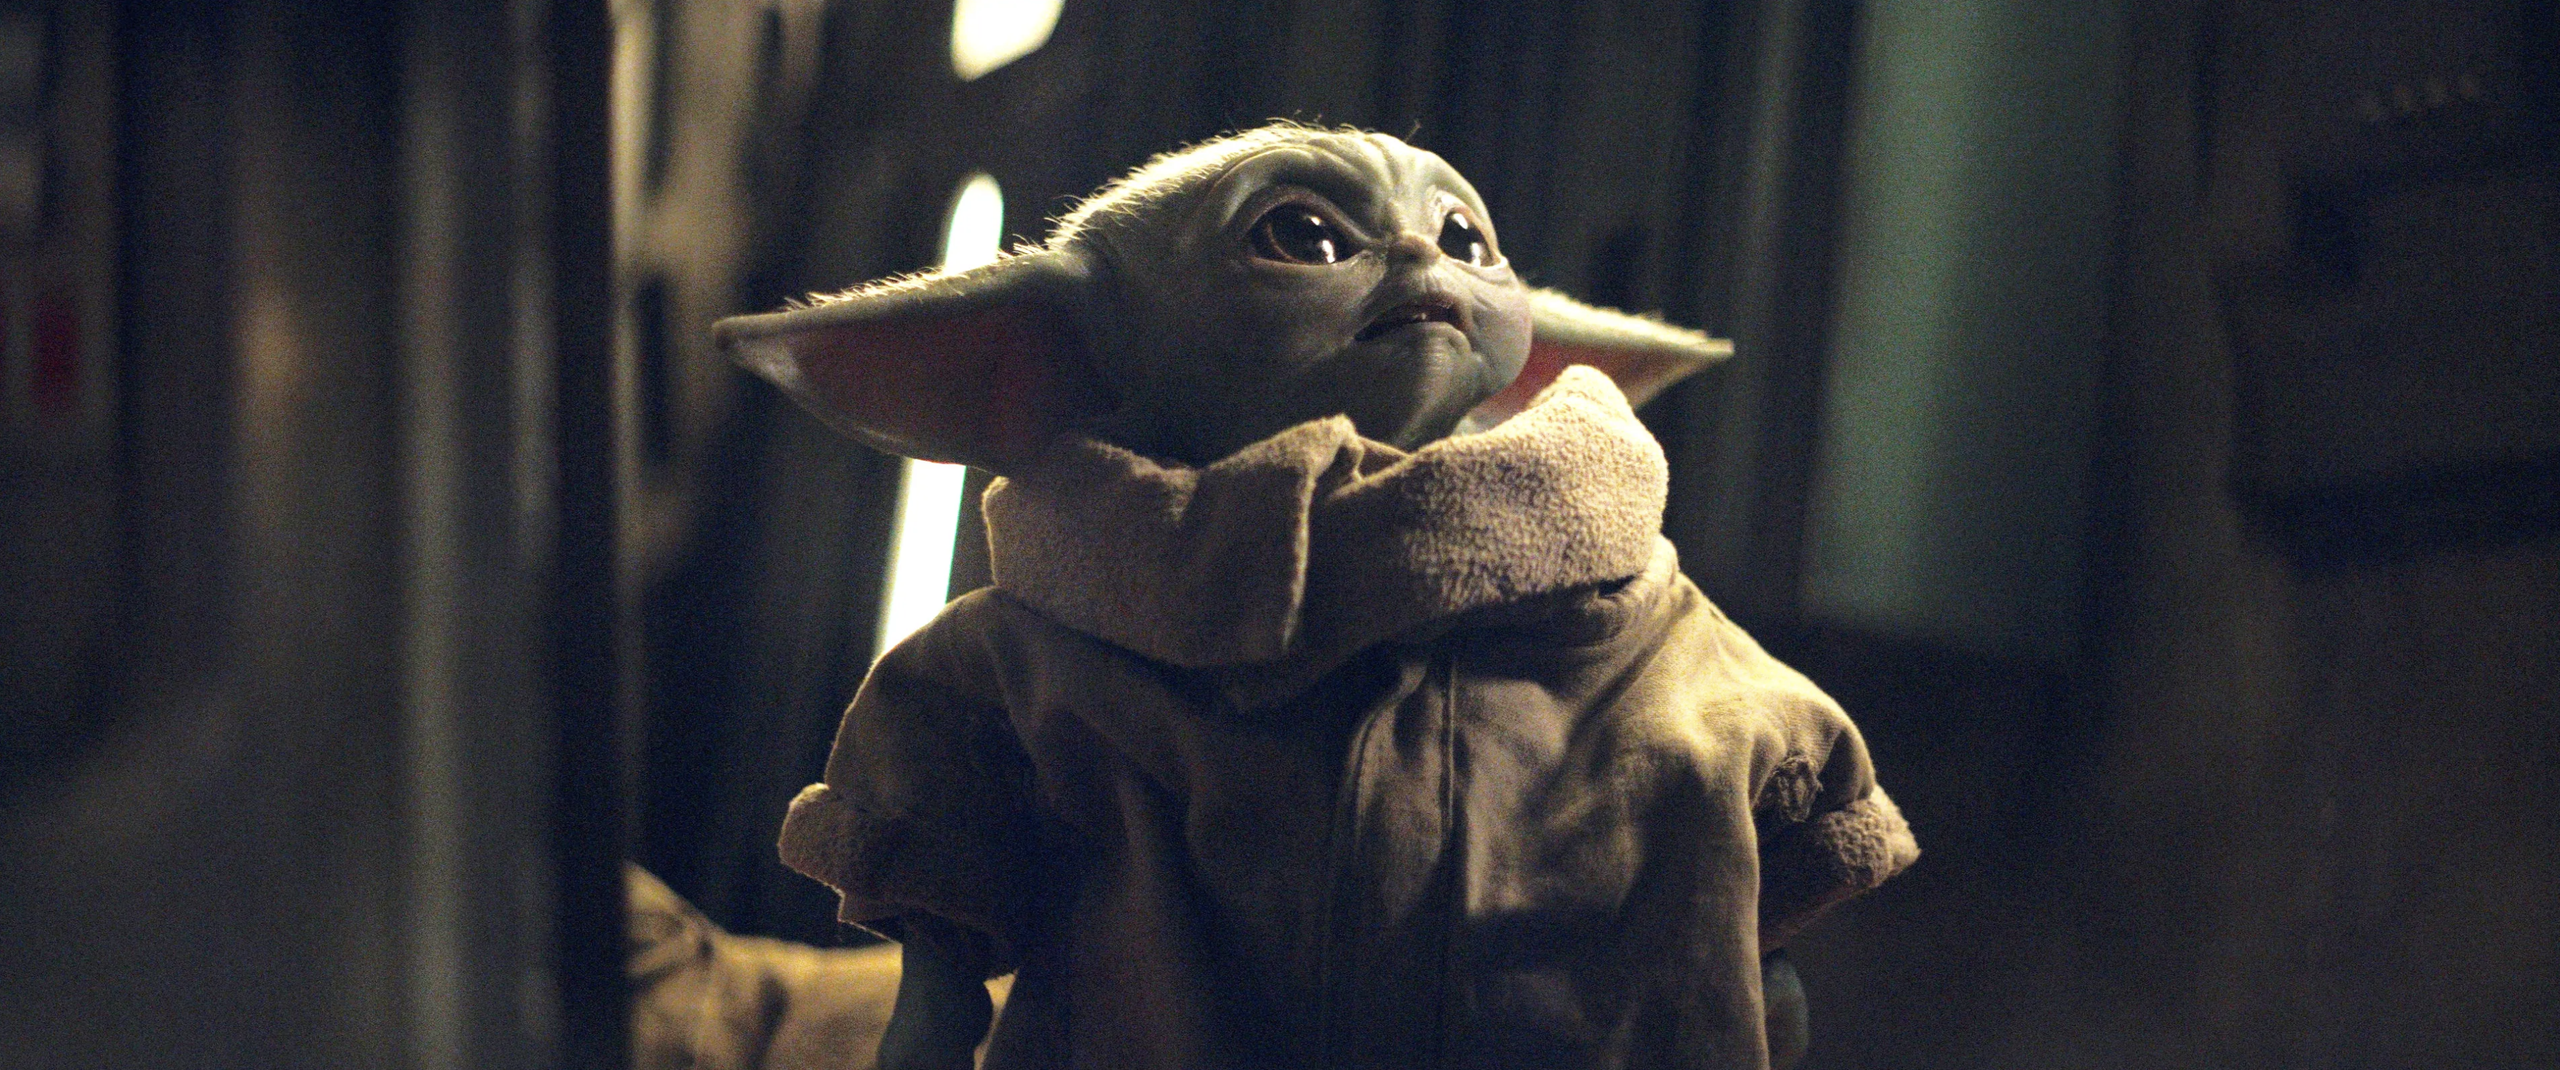 The Mandalorian: Baby Yoda Revelations From a Fan Favorite Character